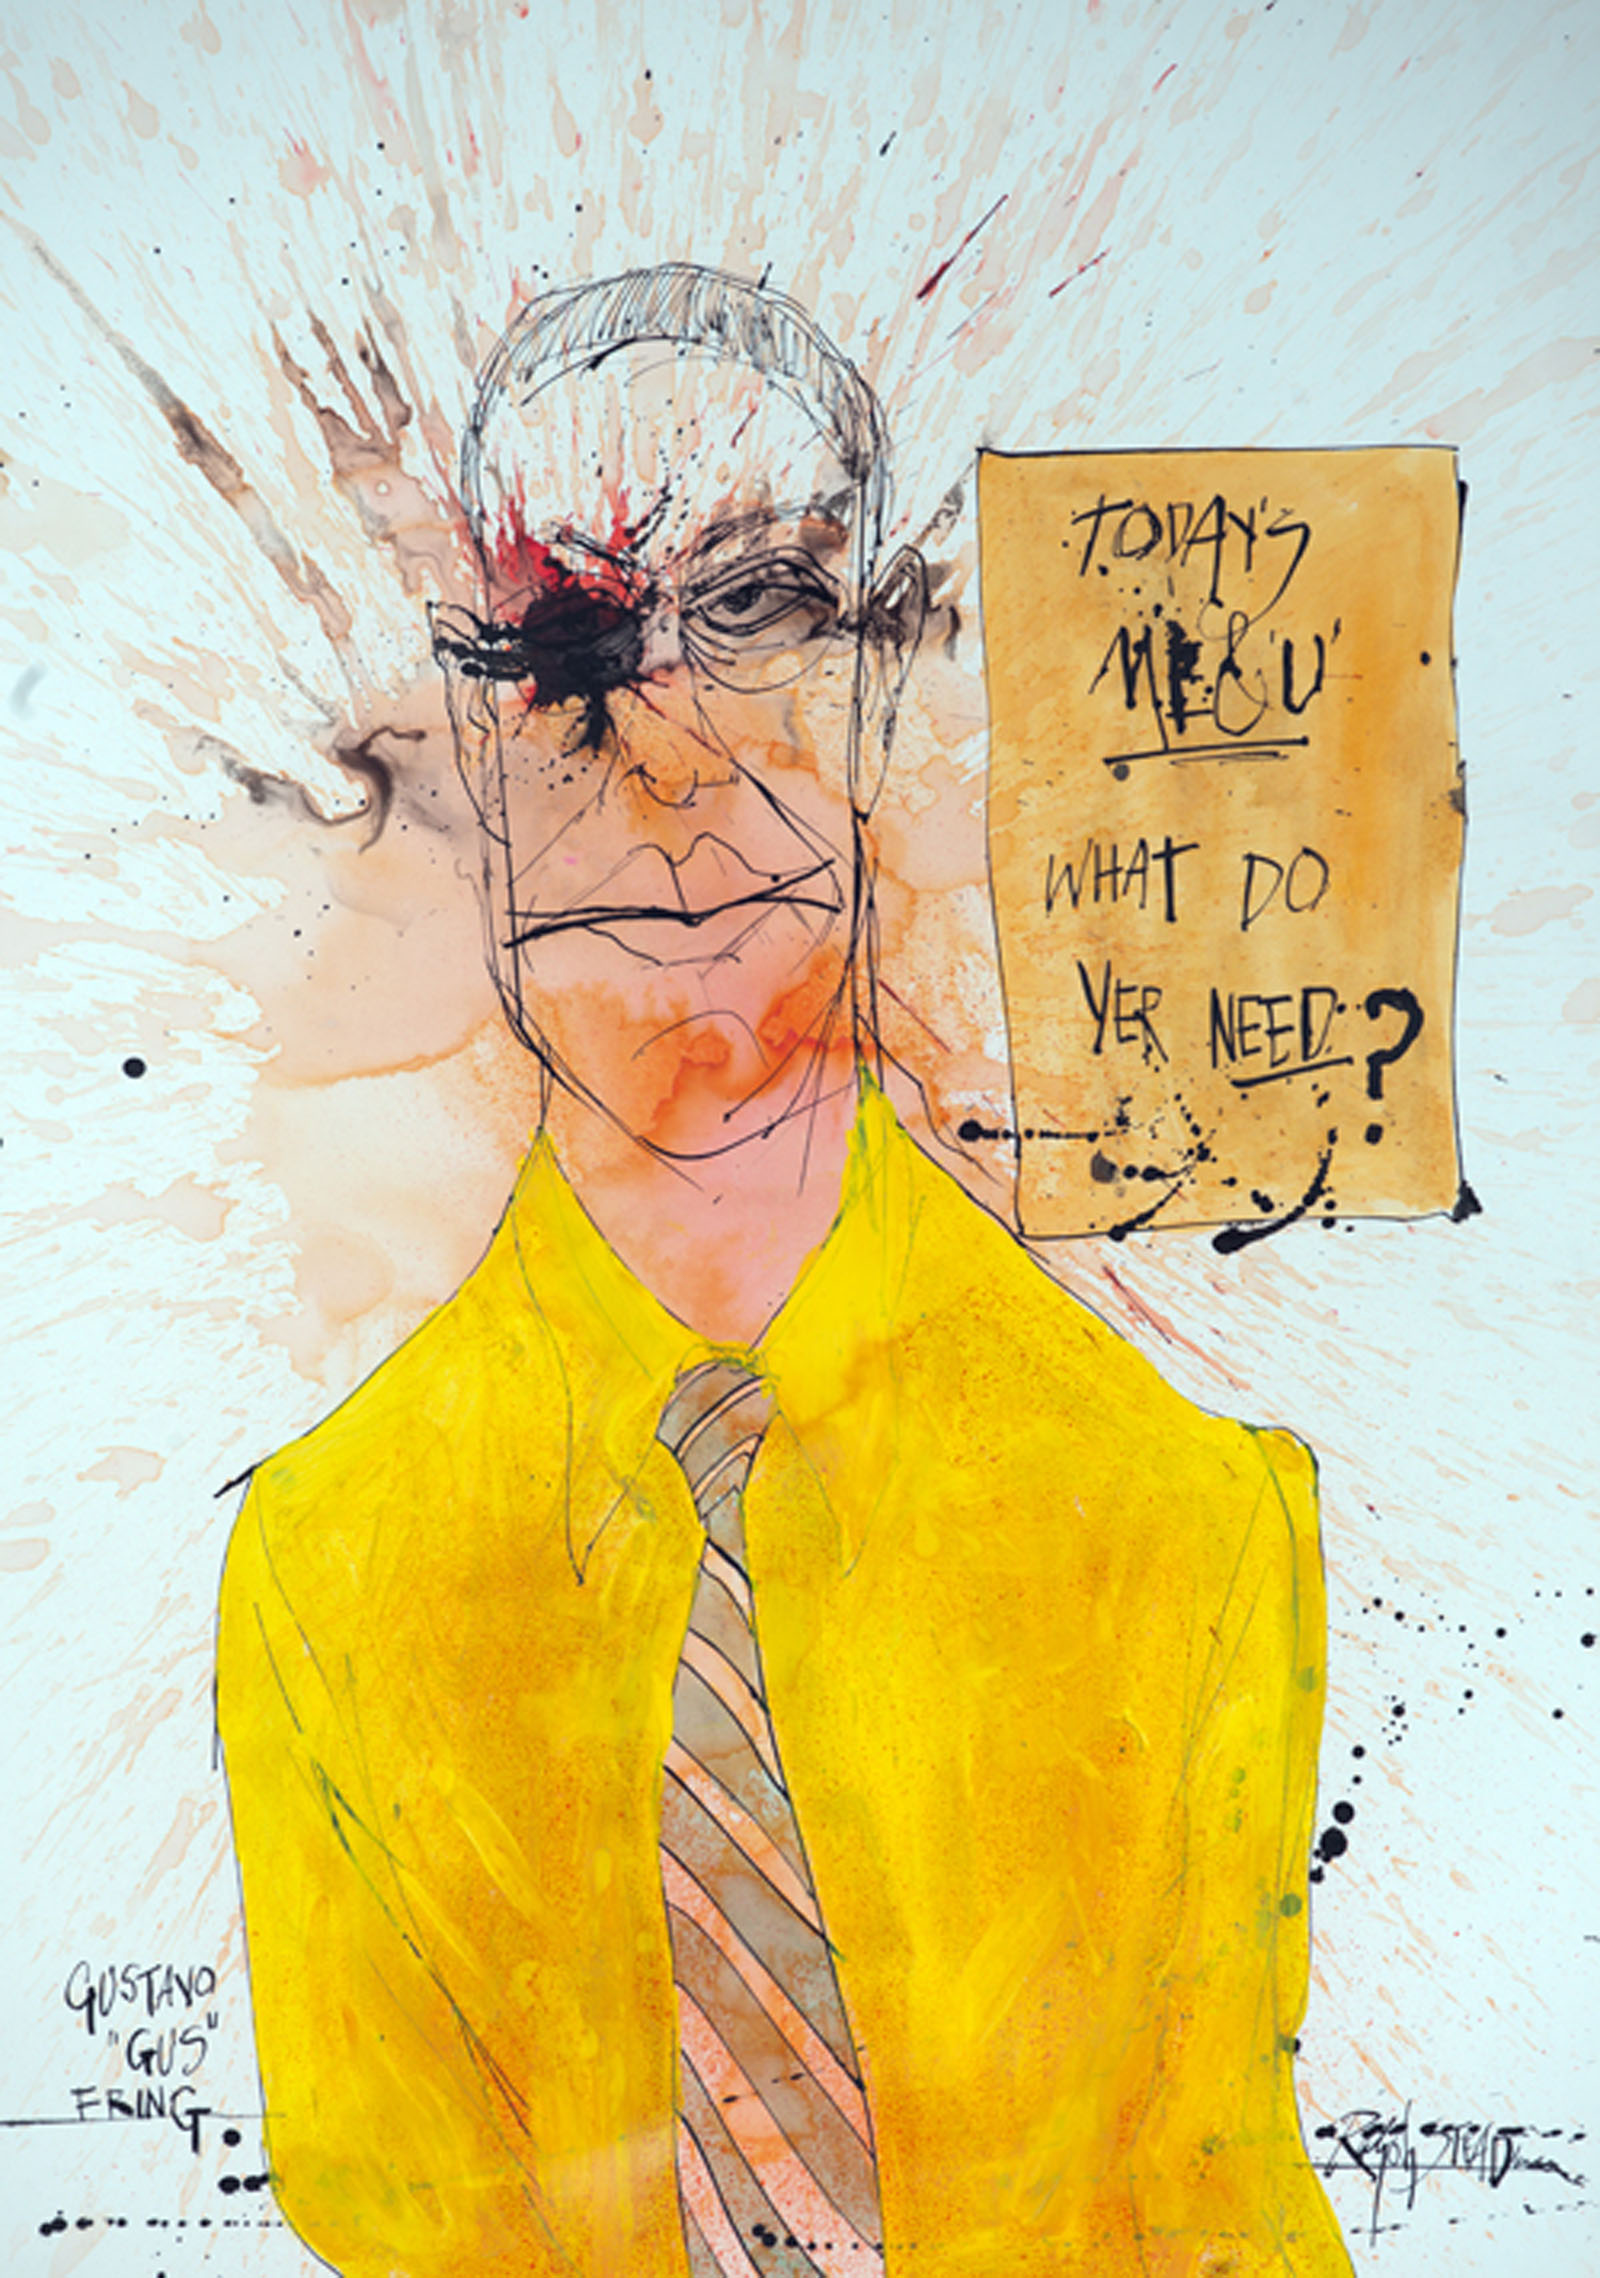 A portrait of the character, Gus from the TV show, Breaking Bad by Ralph Steadman